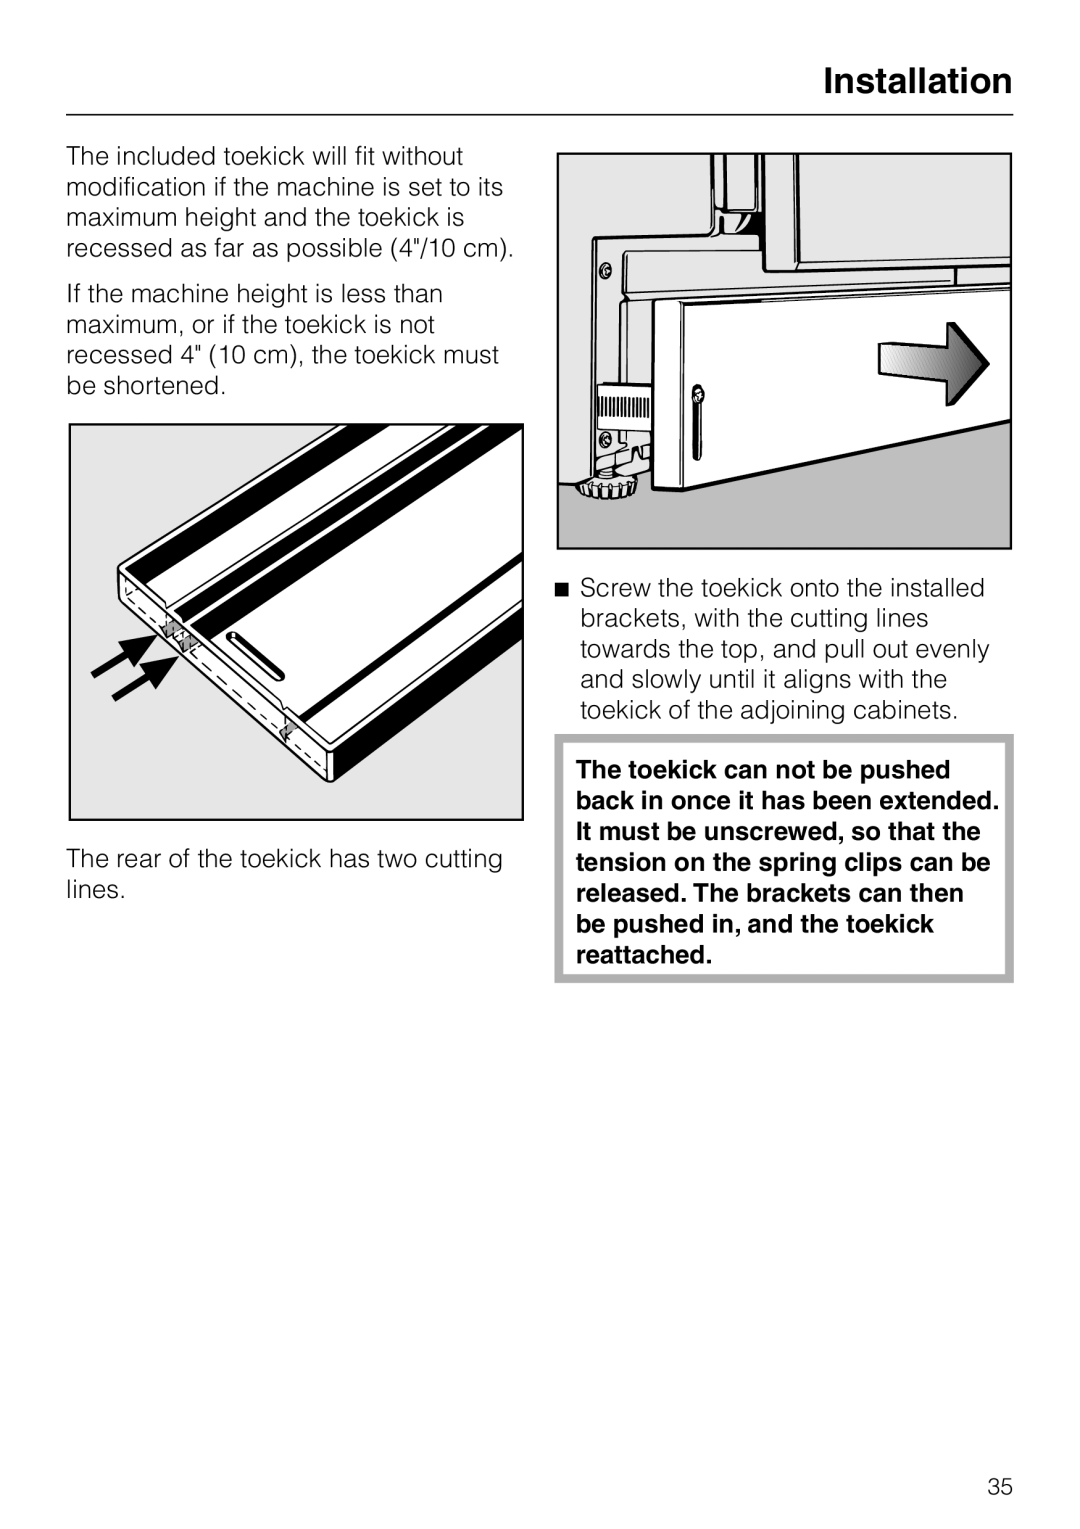 Miele HG01 installation instructions Installation, The rear of the toekick has two cutting lines 